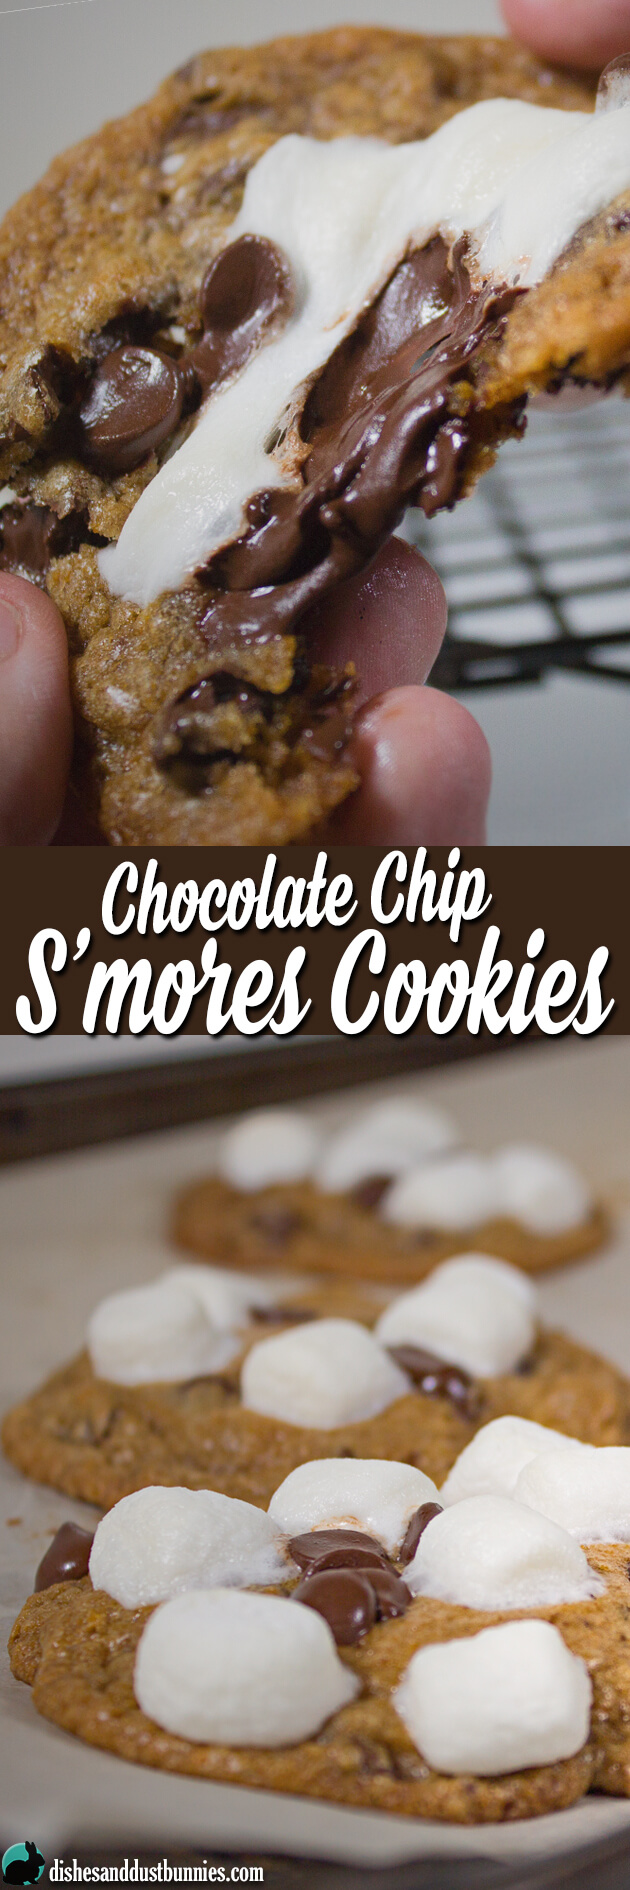 Chocolate Chip S'mores Cookies from dishesanddustbunnies.com